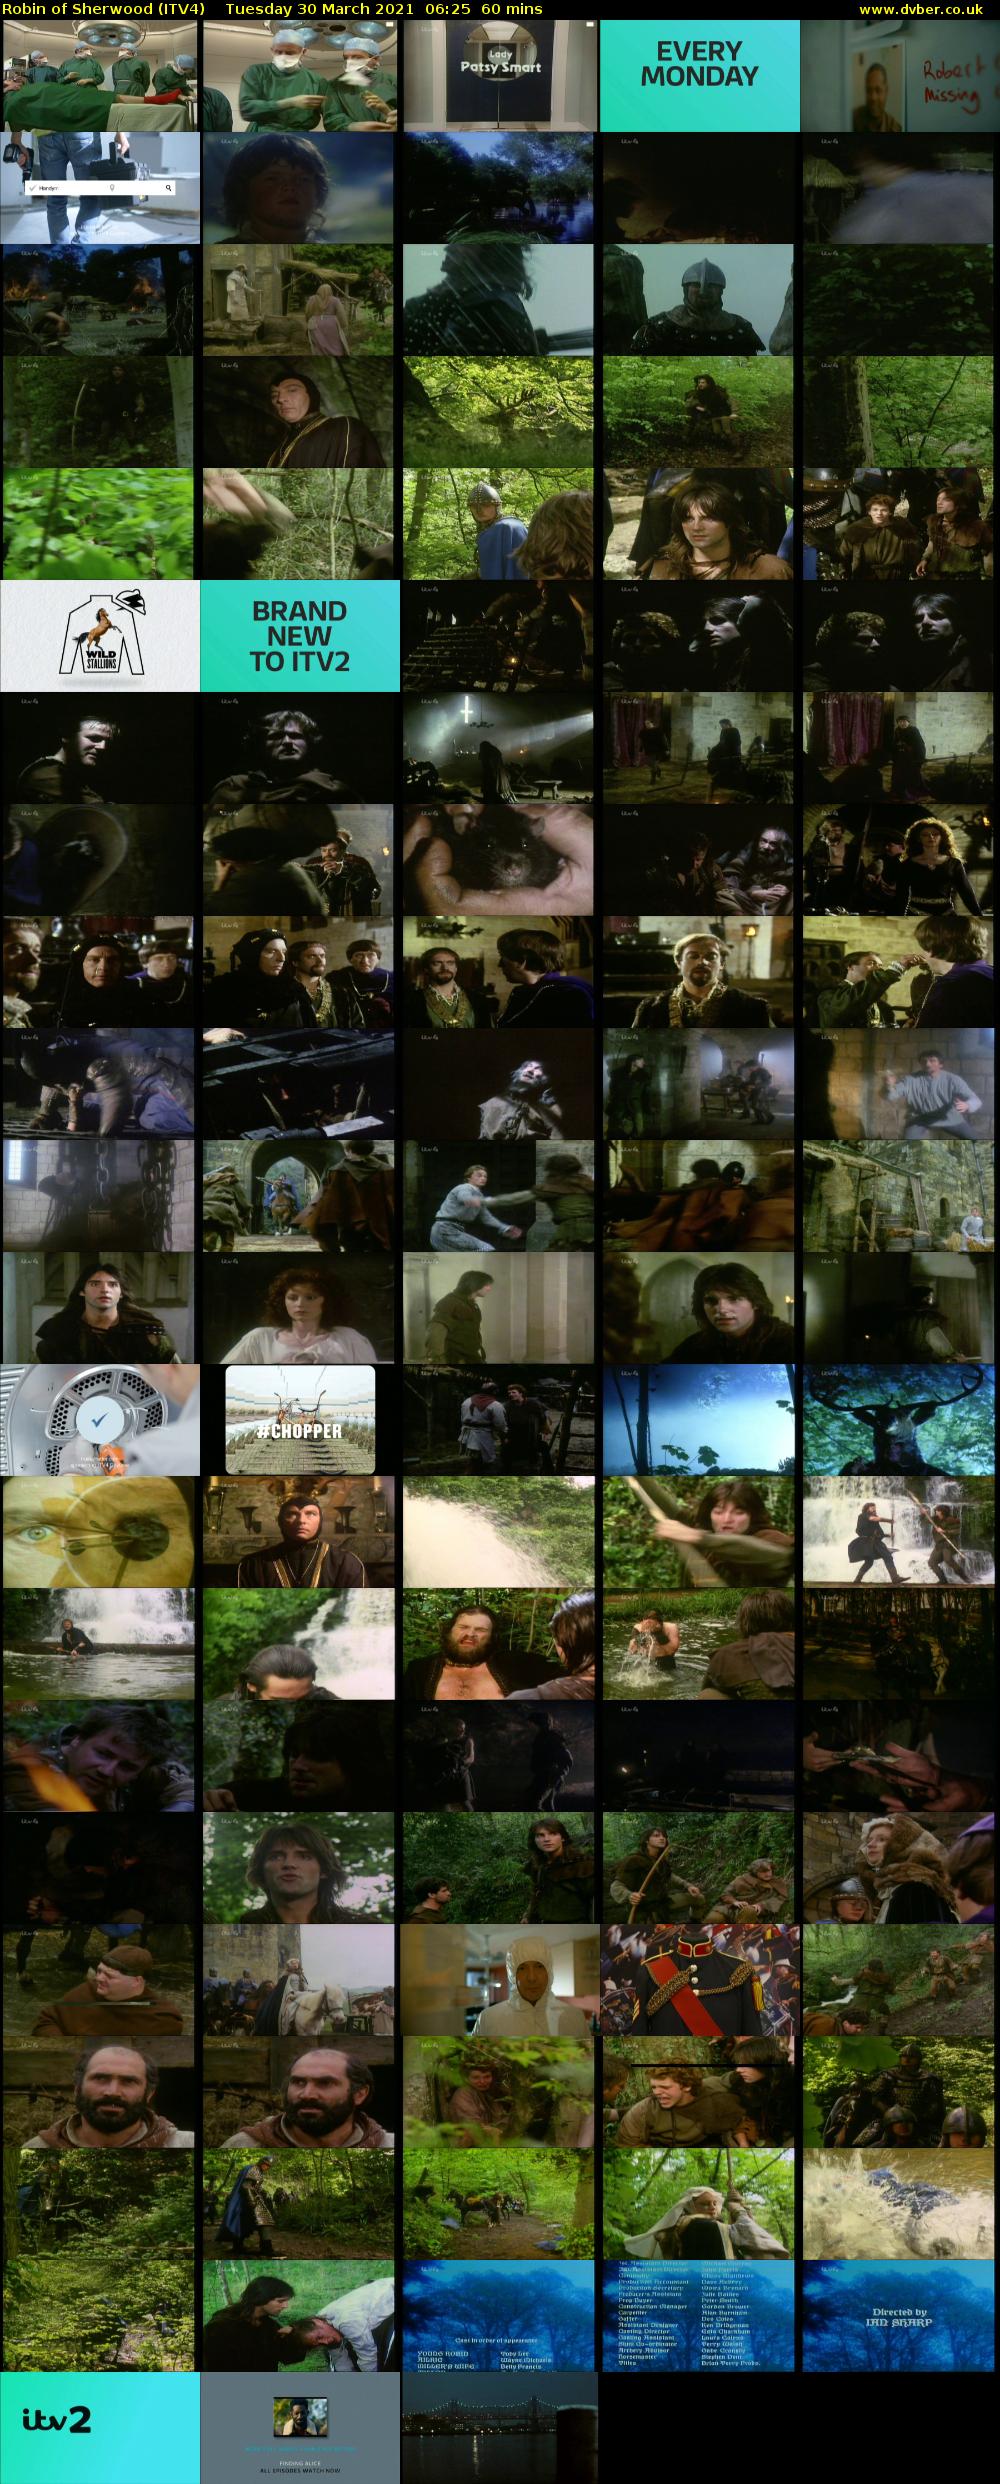 Robin of Sherwood (ITV4) Tuesday 30 March 2021 06:25 - 07:25